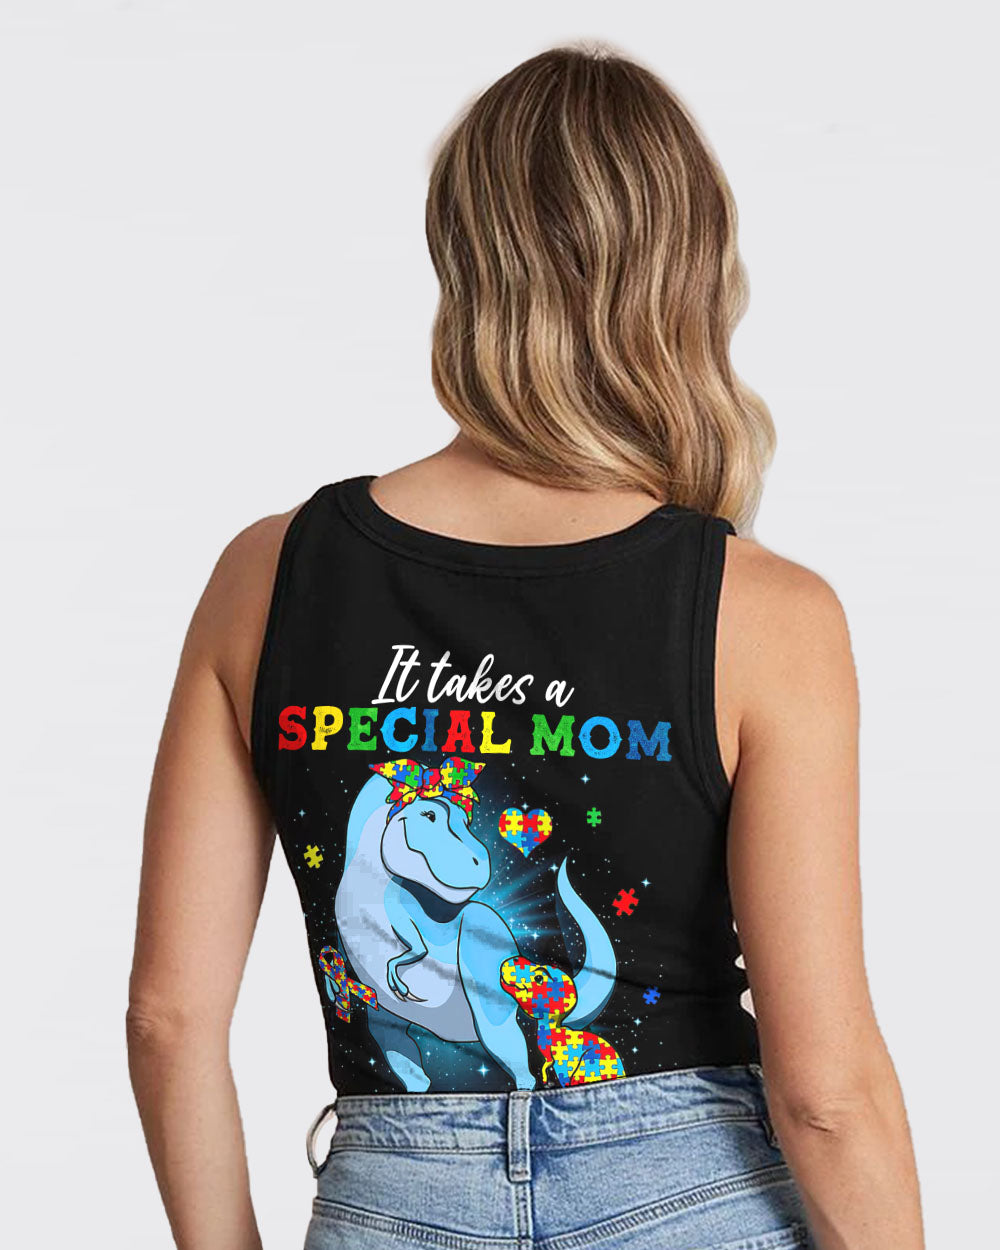 It Takes A Special Mom To Hear What A Son Cannot Say Dinosaur Women's Autism Awareness Tanks